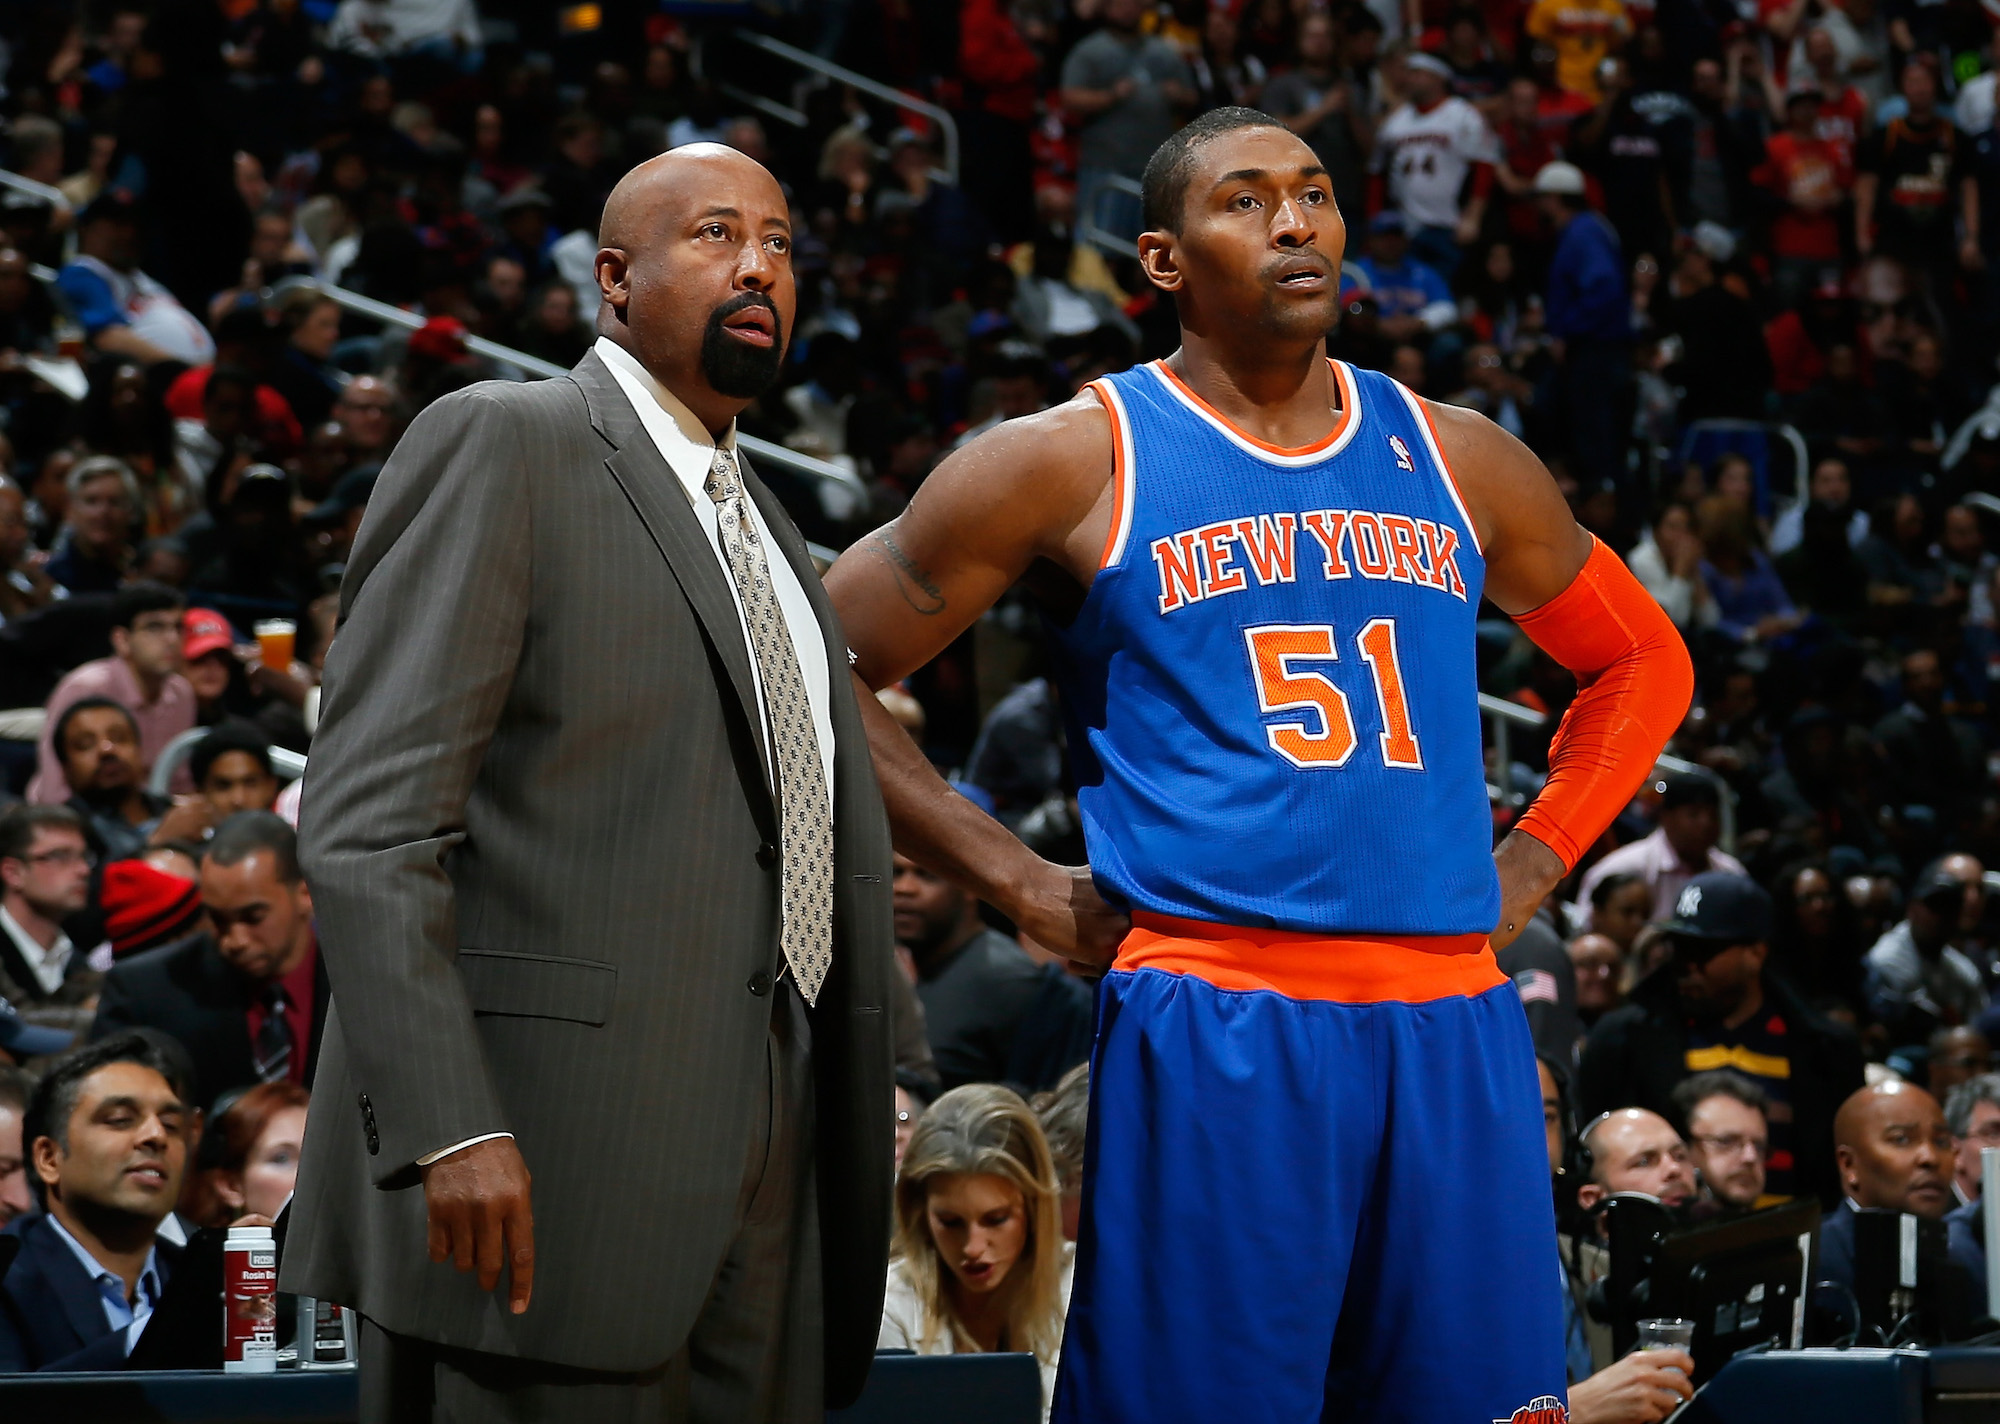 Coaching the New York Knicks would be a dream job for Metta Sandiford-Artest.